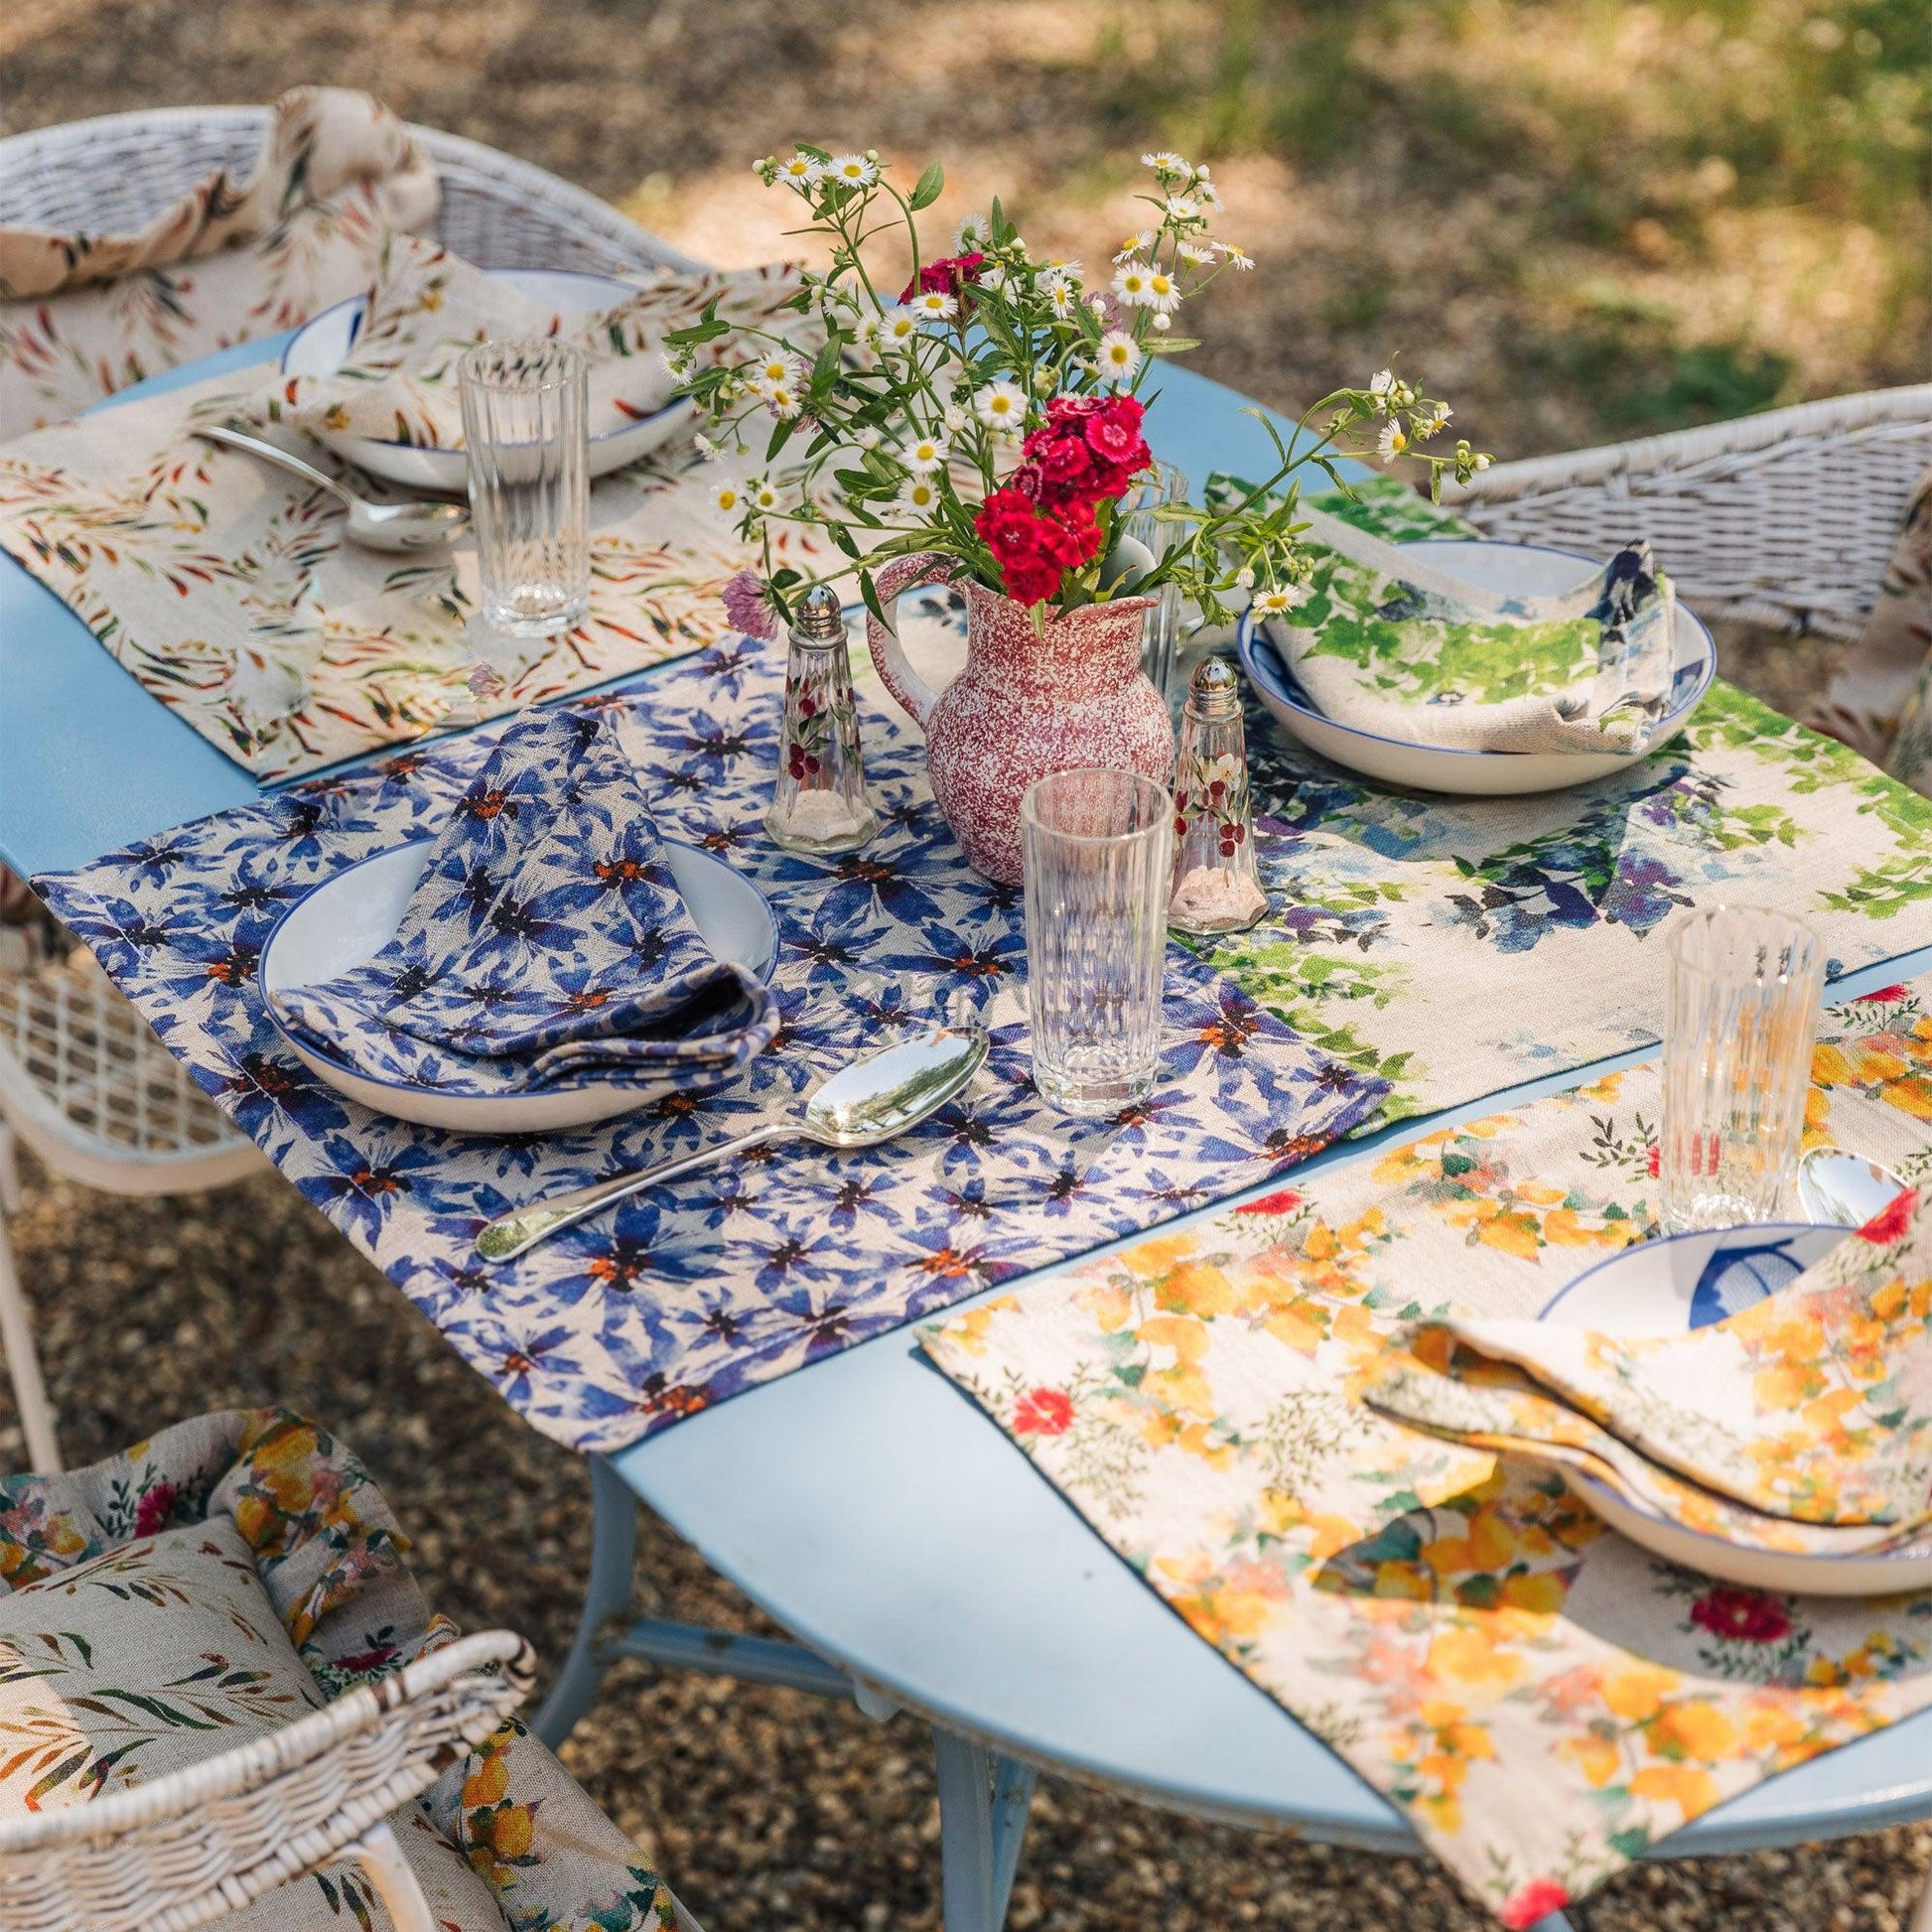 Table setting with organic linen placemats and napkins, with floral prints.